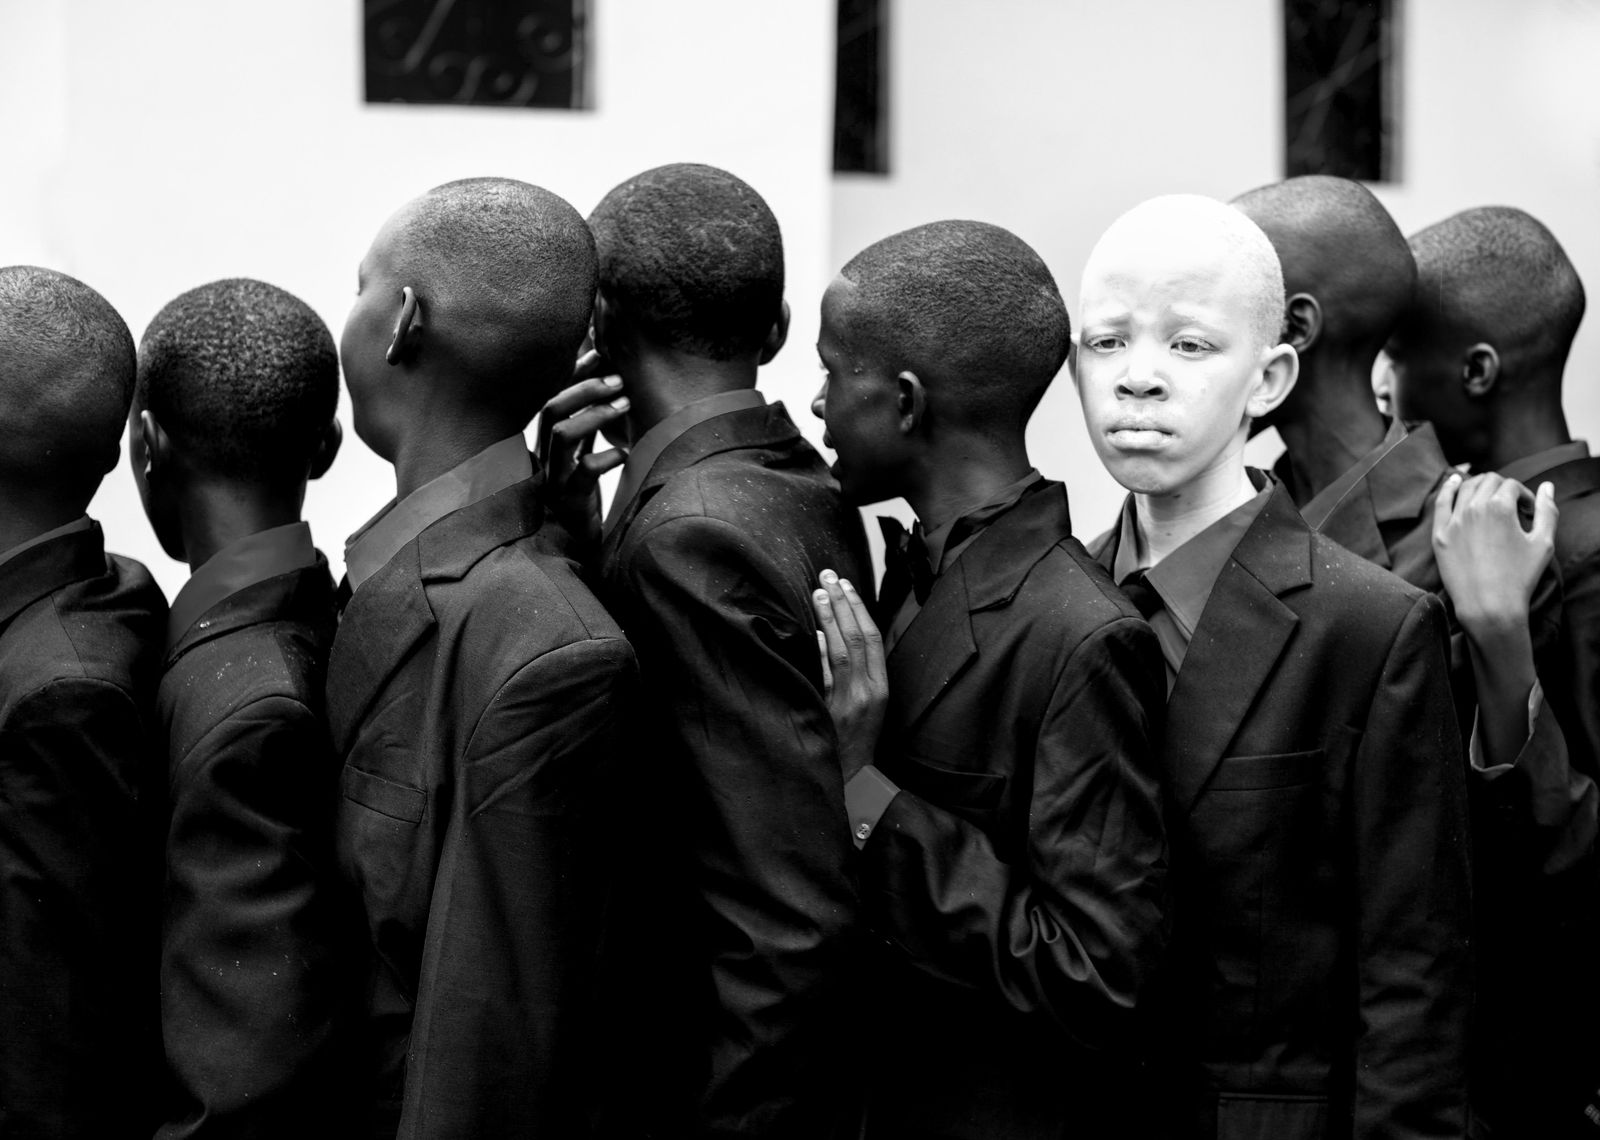 © Soraya Matos - Image from the The Ghost People of Tanzania  photography project